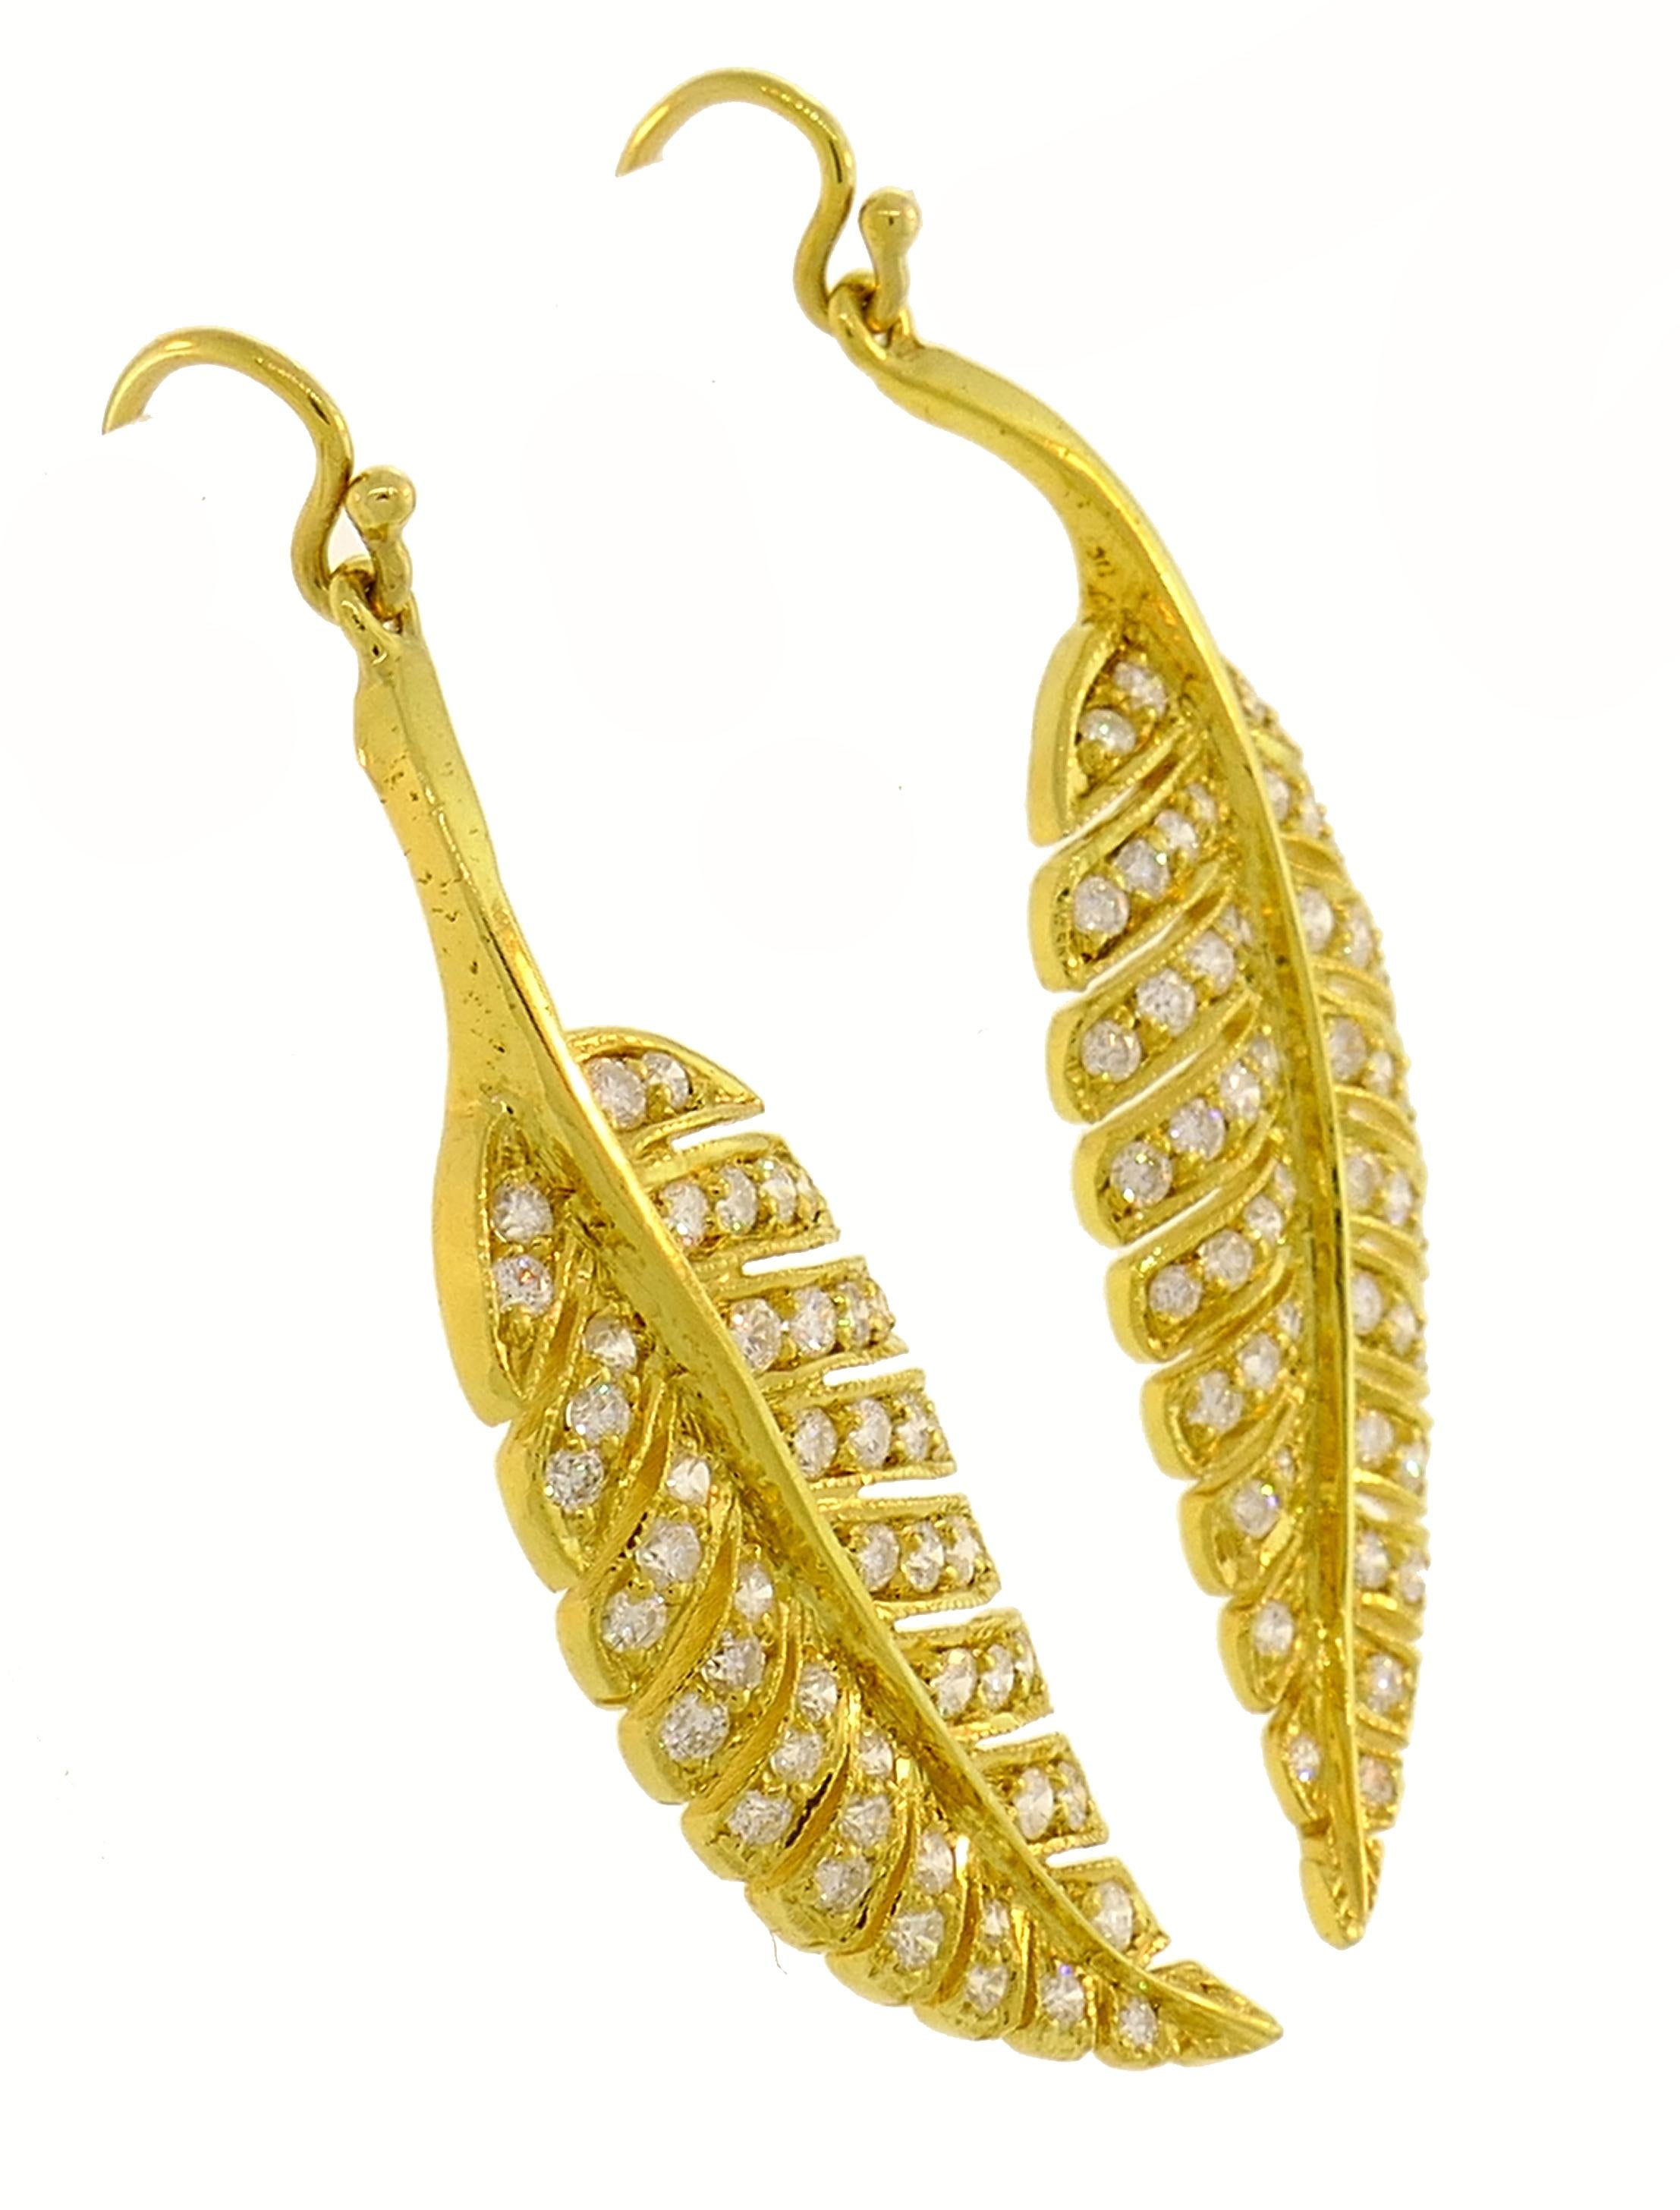 Lovely dangle leaf earrings created by Jennifer Meyer. Feminine, gracious and wearable, the earrings are a great addition to your jewelry collection.
The earrings are made of 18 karat (stamped) yellow gold and set with round brilliant cut diamonds